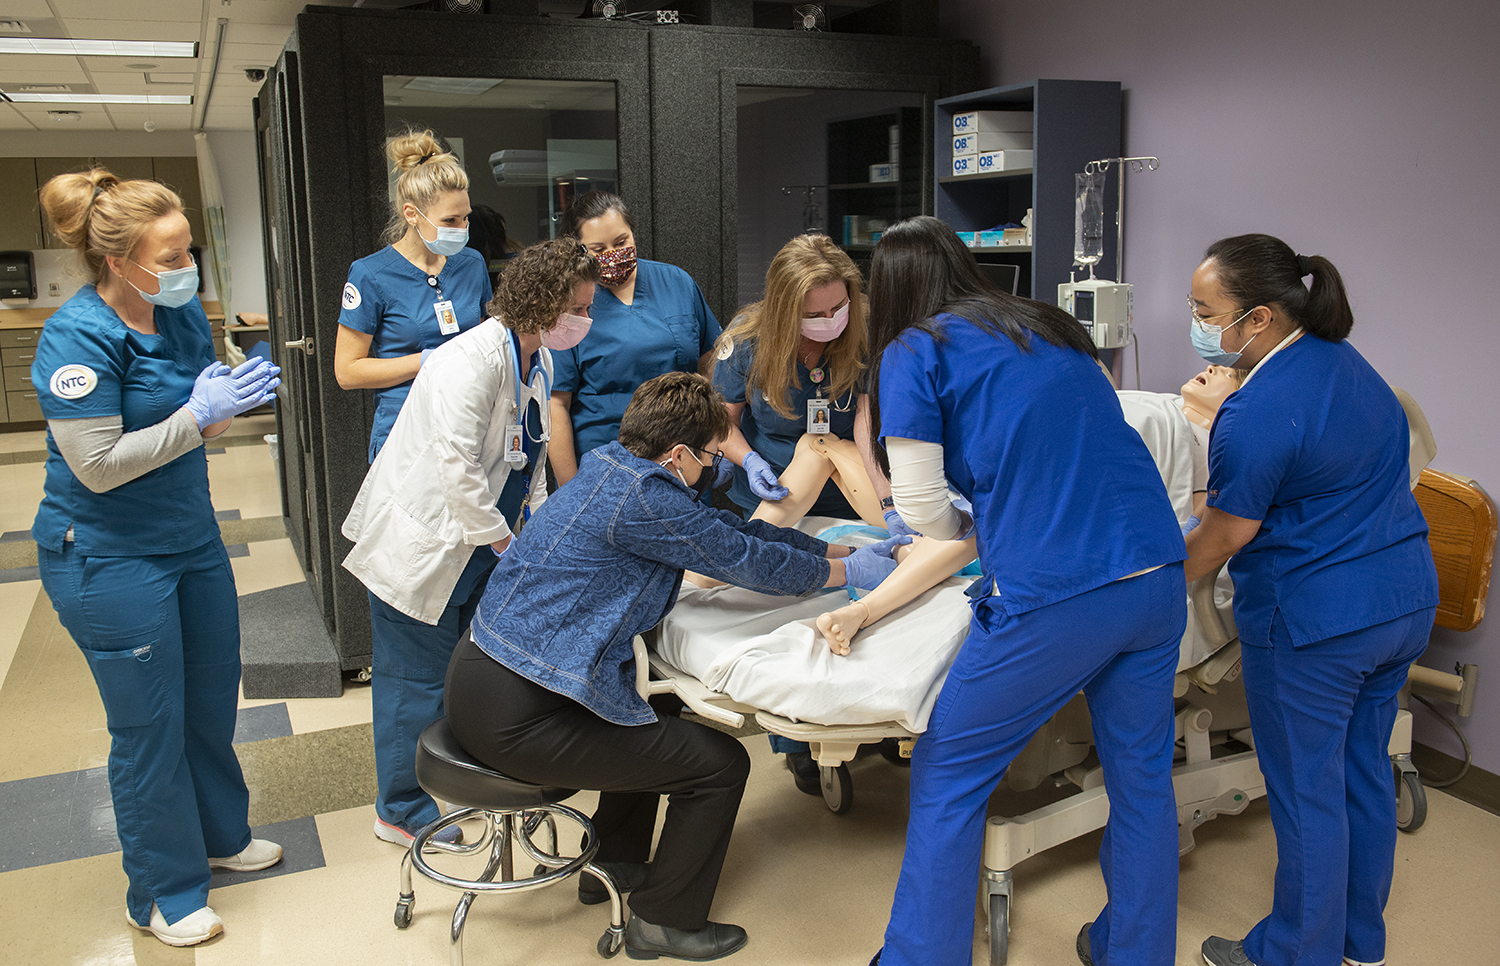 President Hensrud tours the nursing lab with students.